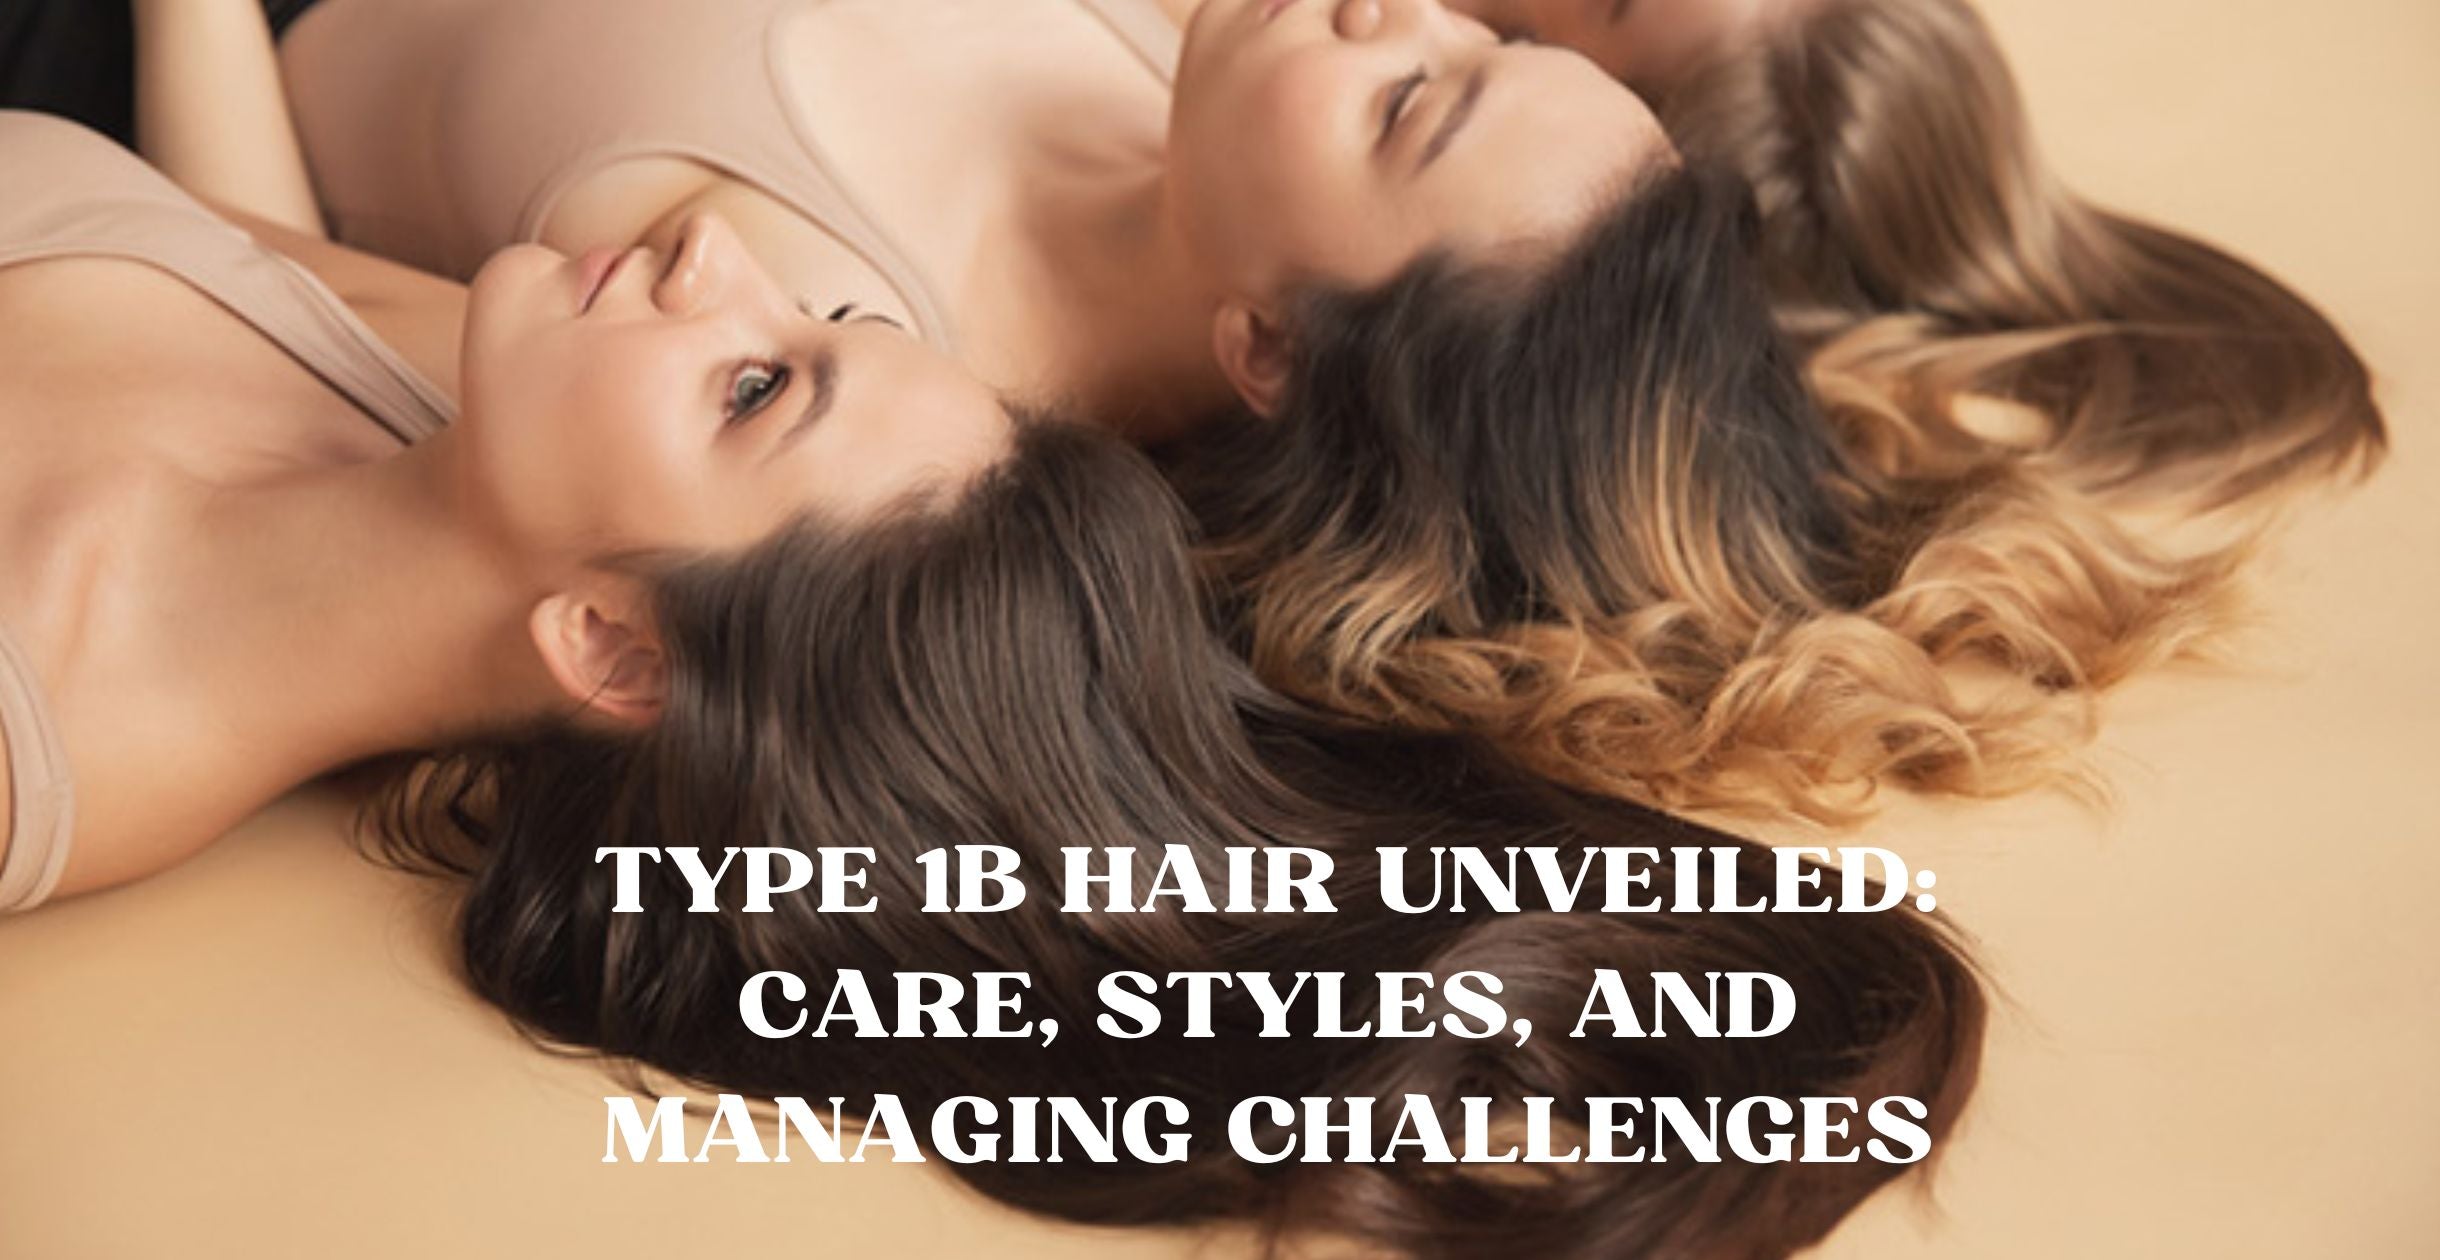 Type 1b Hair Unveiled: Care, Styles, and Managing Challenges